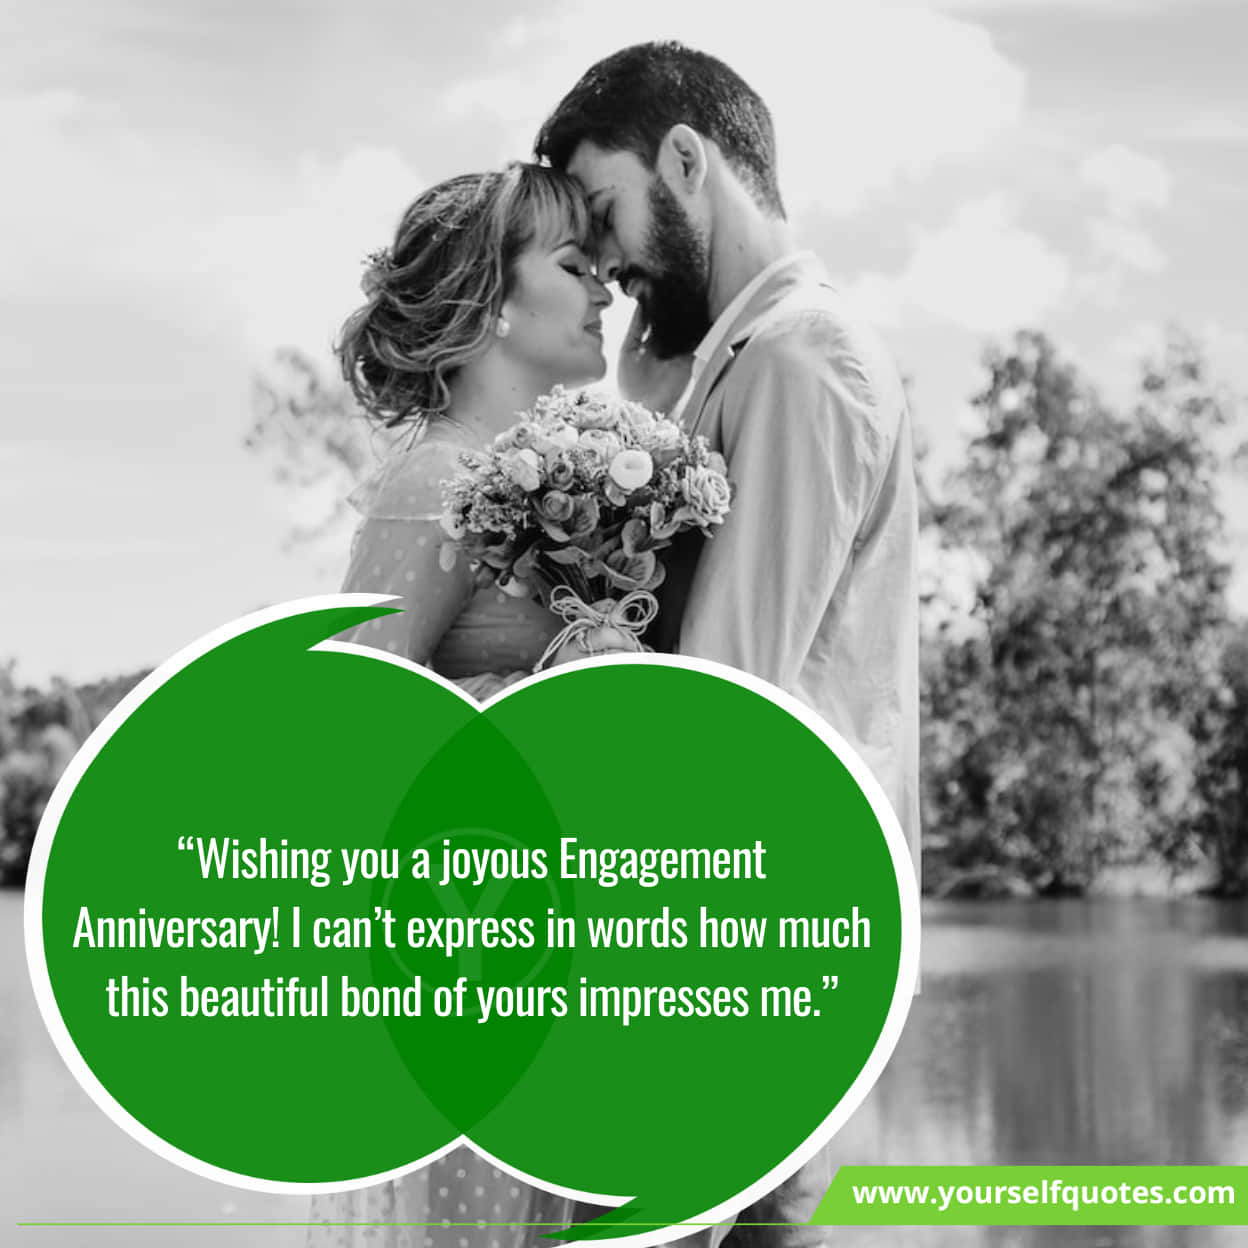 Inspiring Wishes, Quotes On Happy Engagement Anniversary